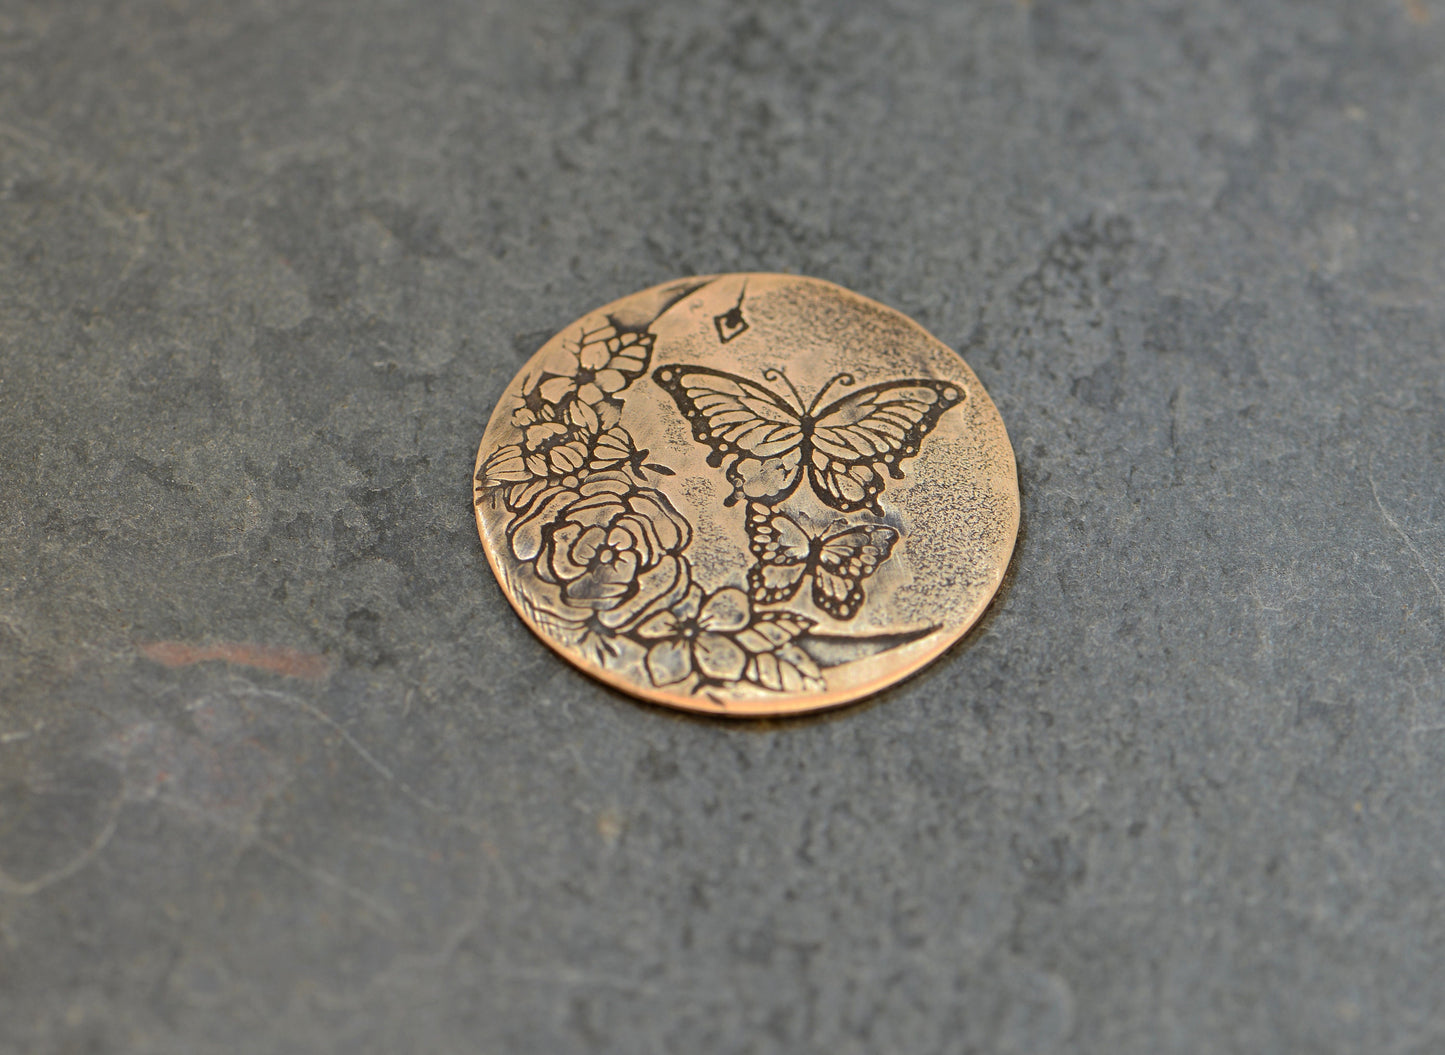 Butterfly and Floral Artistic Copper Golf Ball Marker